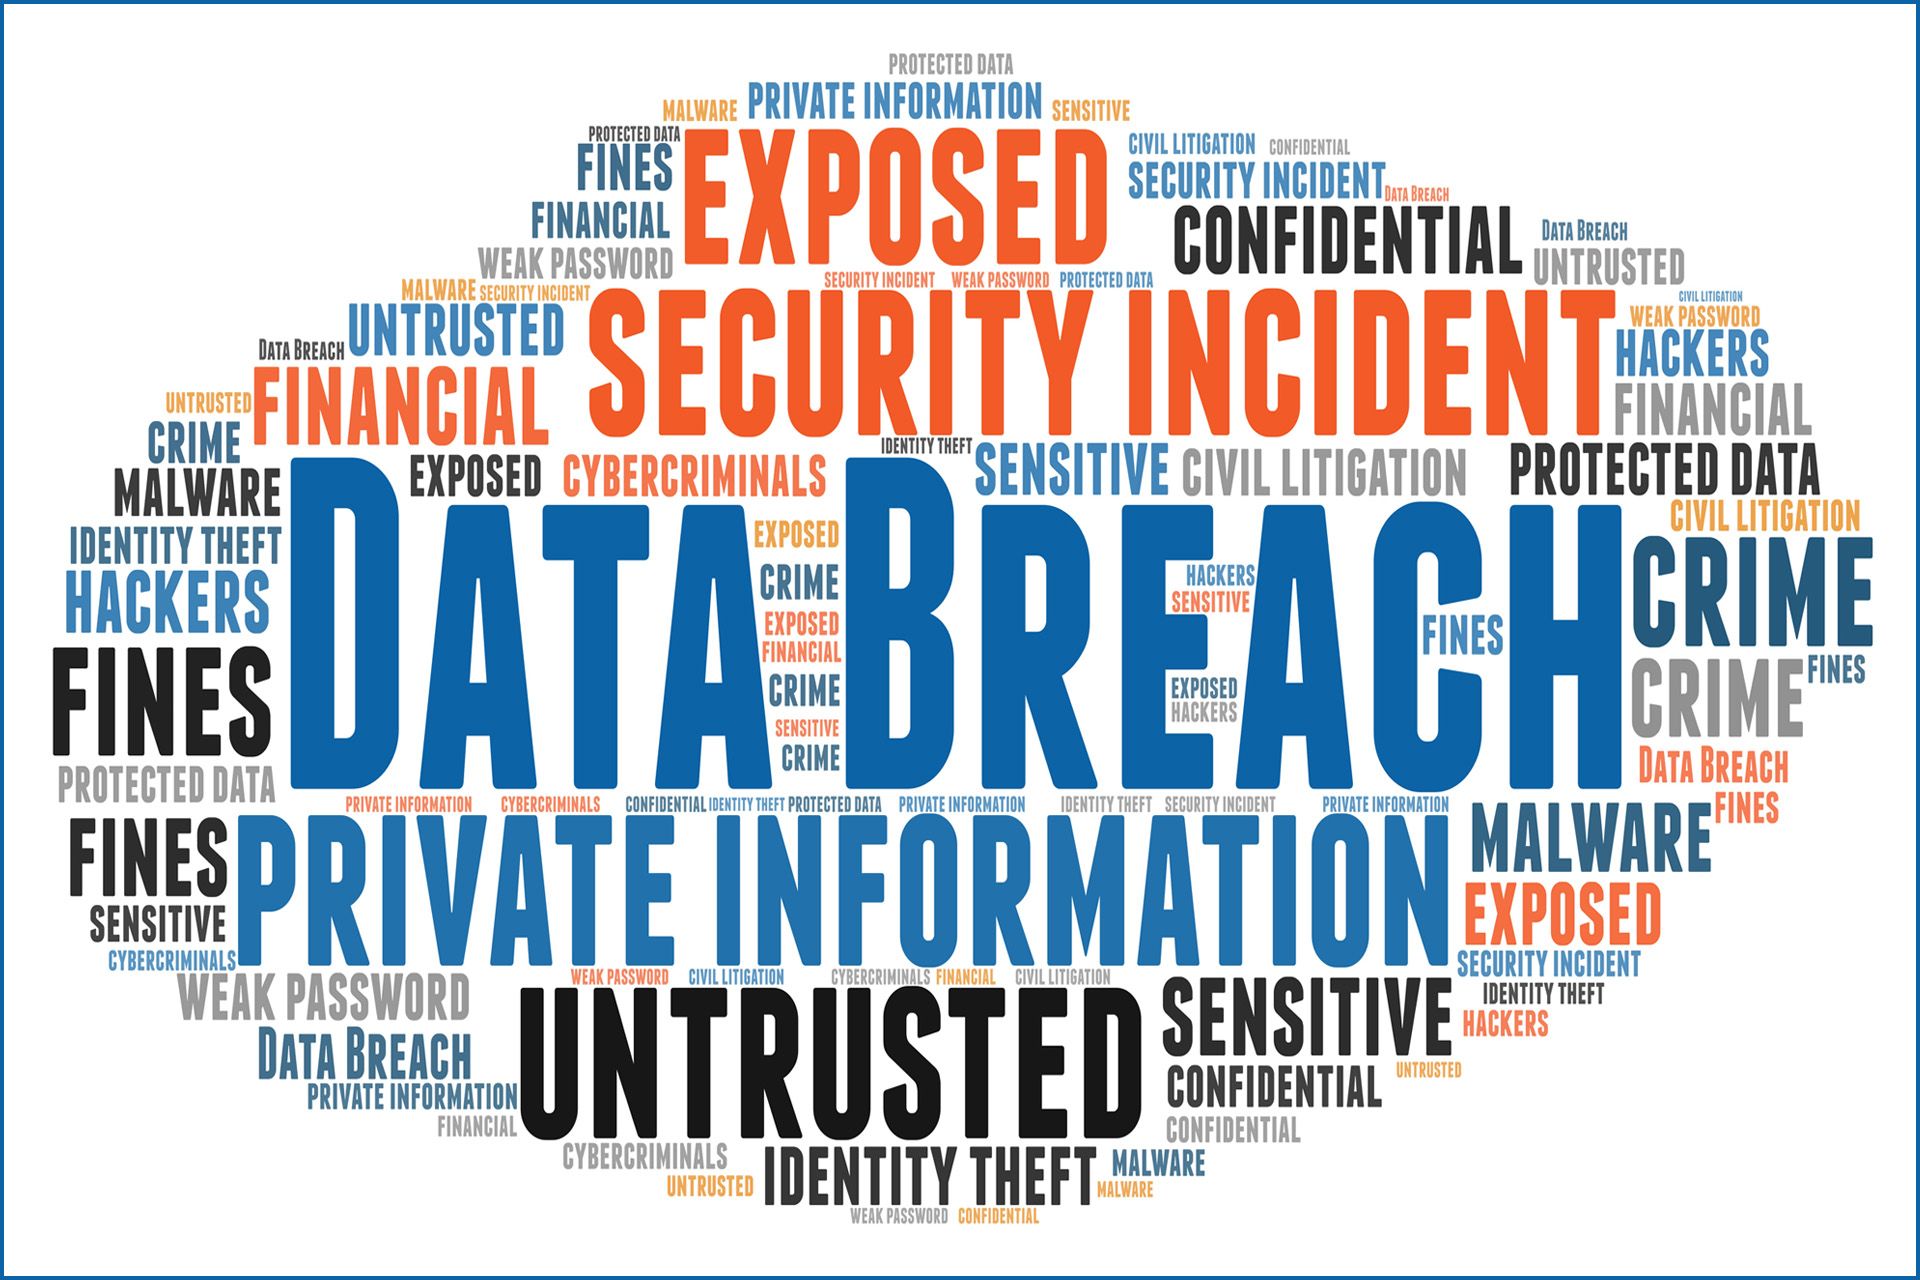 Why We Should Not Take Data Breaches for Granted